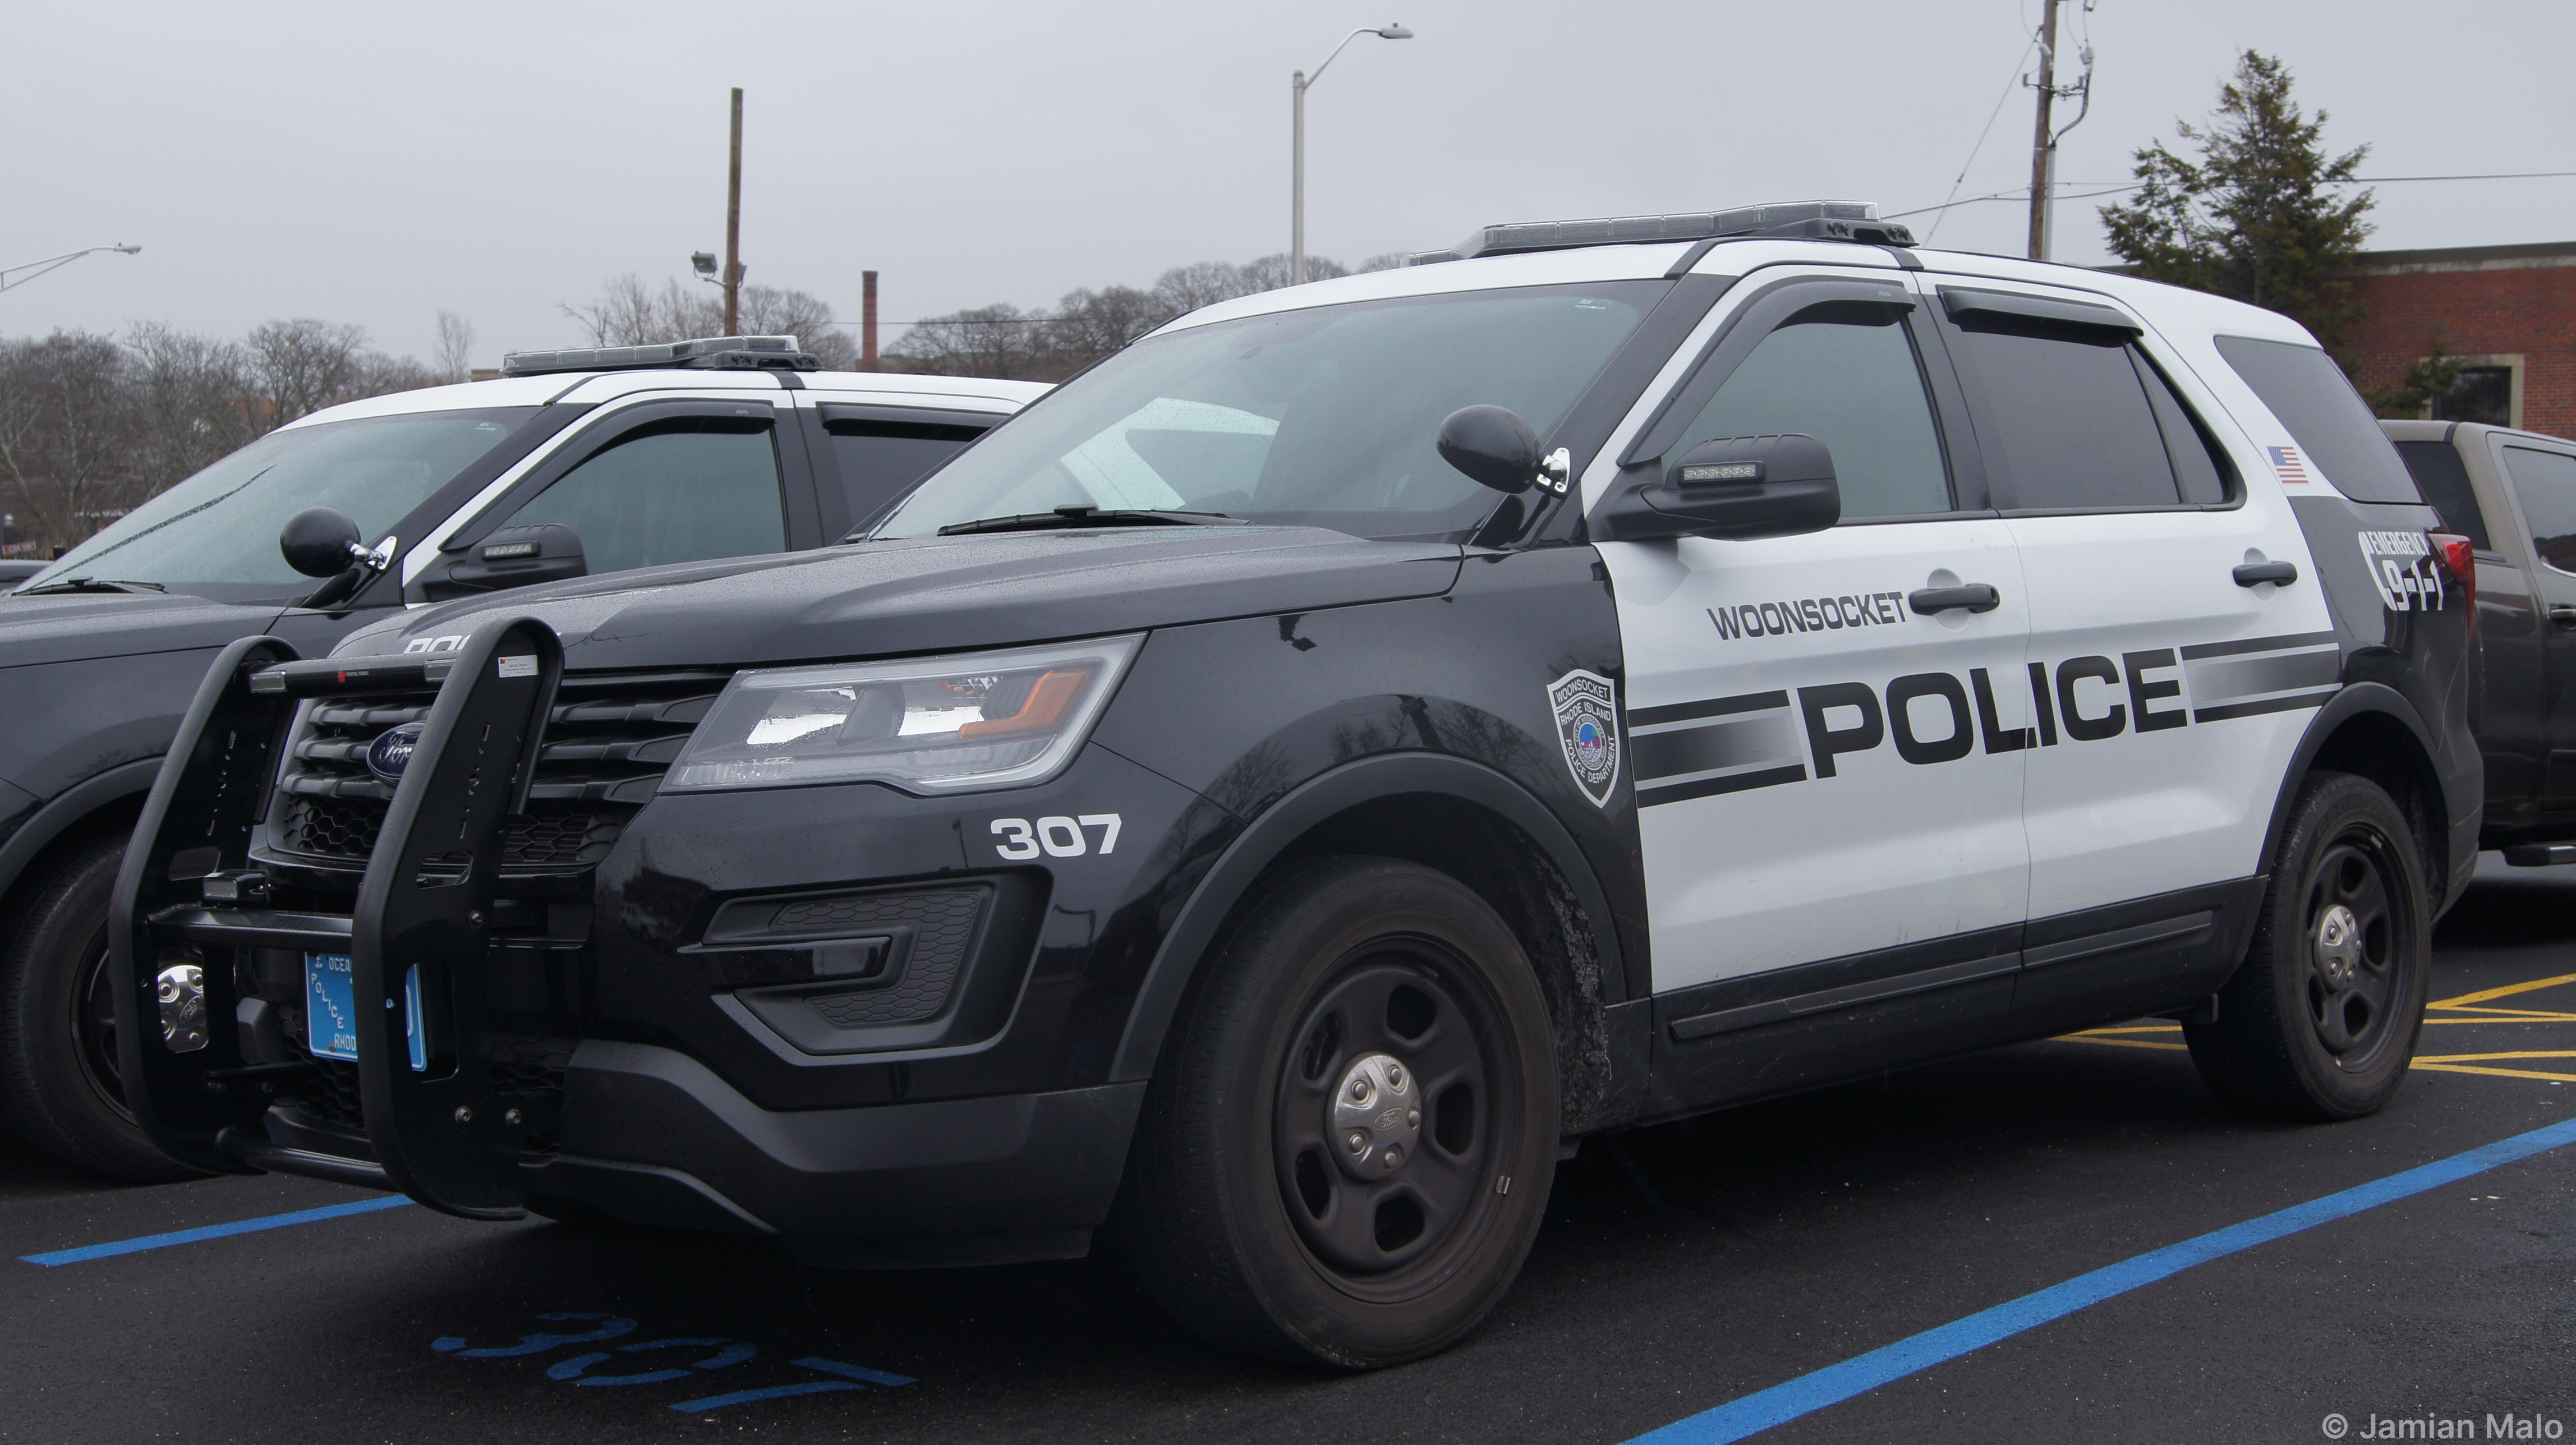 A photo  of Woonsocket Police
            Cruiser 307, a 2016-2018 Ford Police Interceptor Utility             taken by Jamian Malo